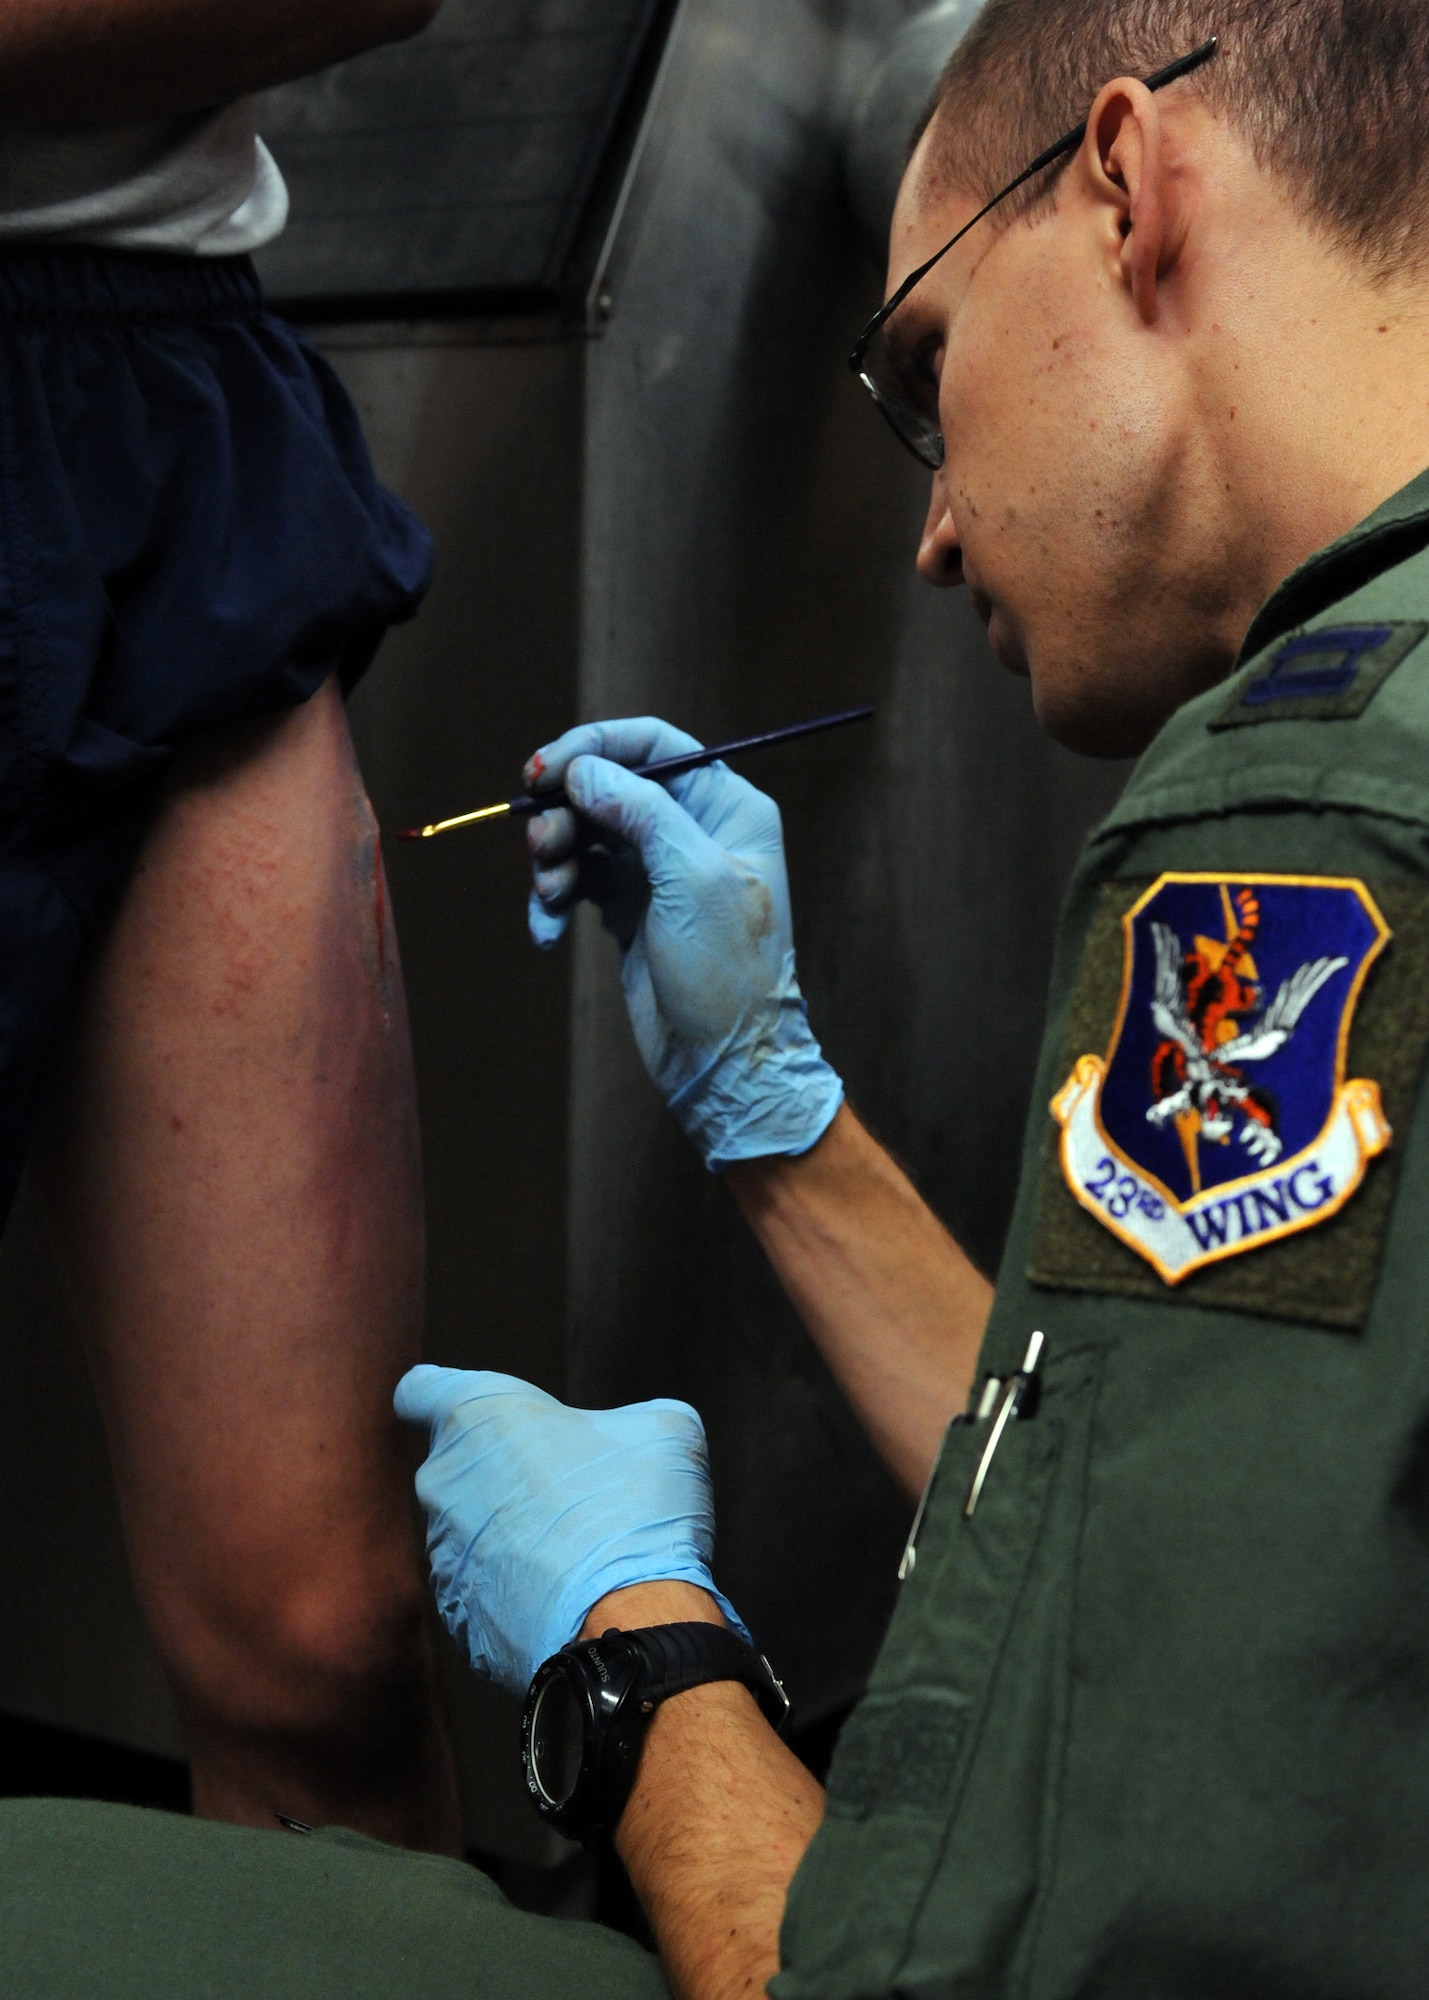 DAVIS-MONTHAN AIR FORCE BASE, Ariz. – Capt. Erik DeSoucy, 563rd Operations Support Squadron flight physician, applies fake blood to a simulated laceration on the leg of Braden Vincent, University of Arizona Air Force ROTC cadet, at his moulage station during the Angel Thunder exercise here Oct. 11. Approximately 1,400 U.S. Military, federal and state employees, and coalition forces are participating in the fifth-annual Angel Thunder exercise, the largest military combat search and rescue exercise in the world. (U.S. Air Force photo/Airman 1st Class Timothy D. Moore)